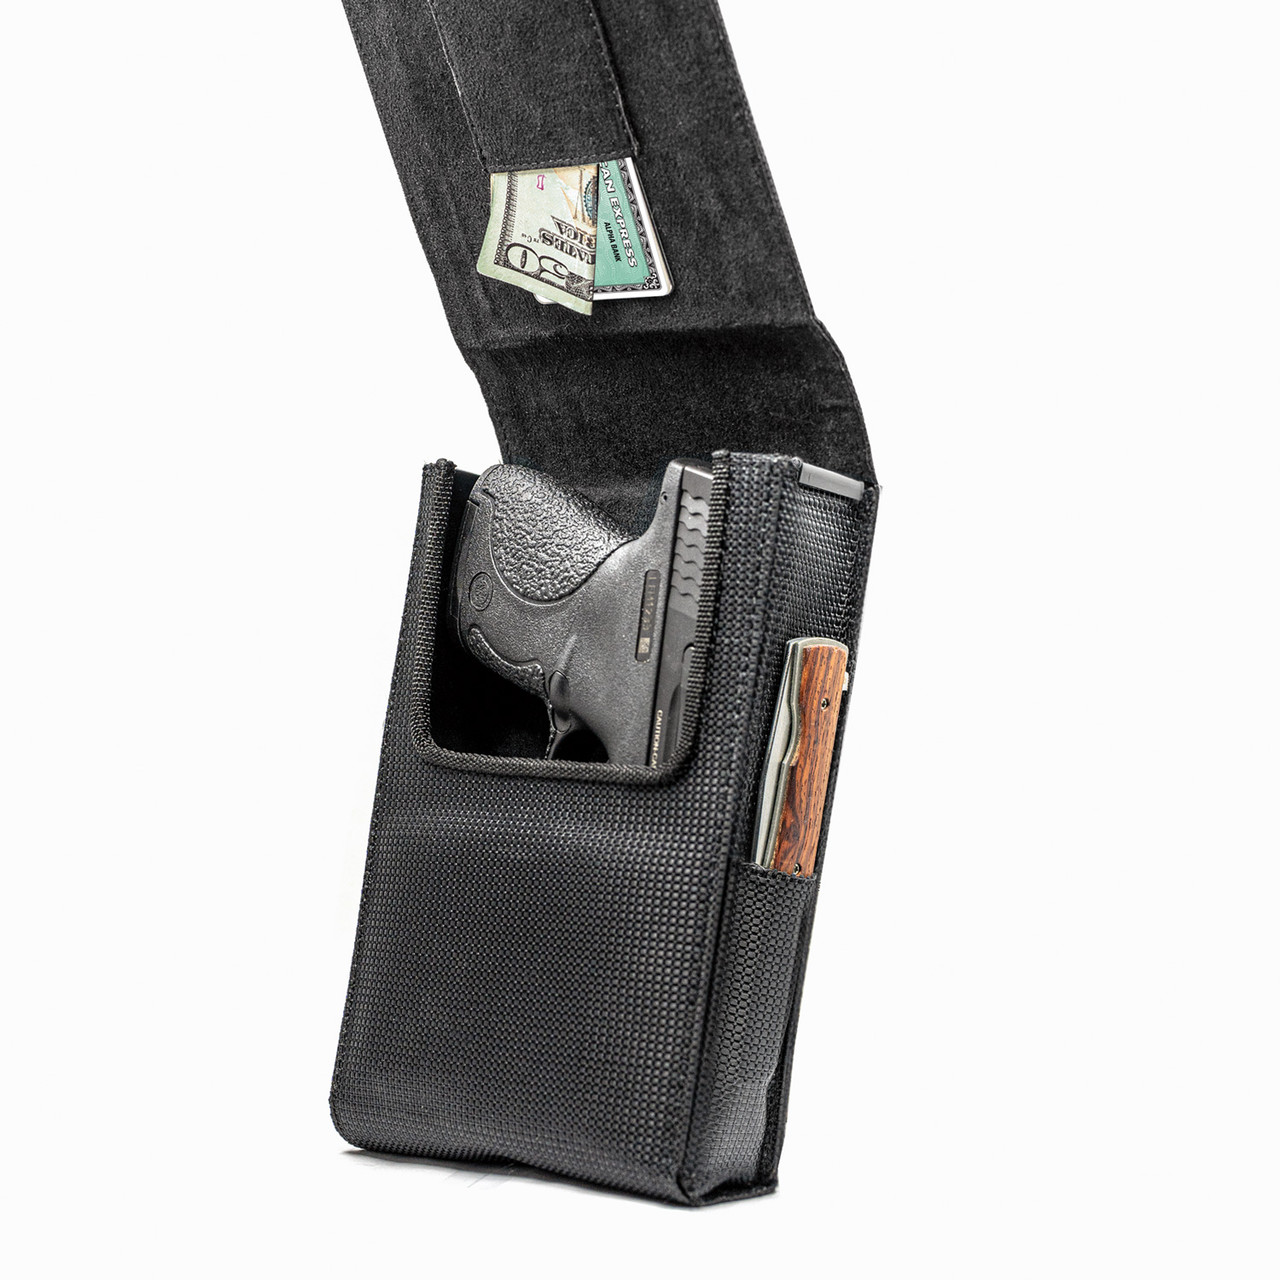 The Kahr CW9 Perfect Holster